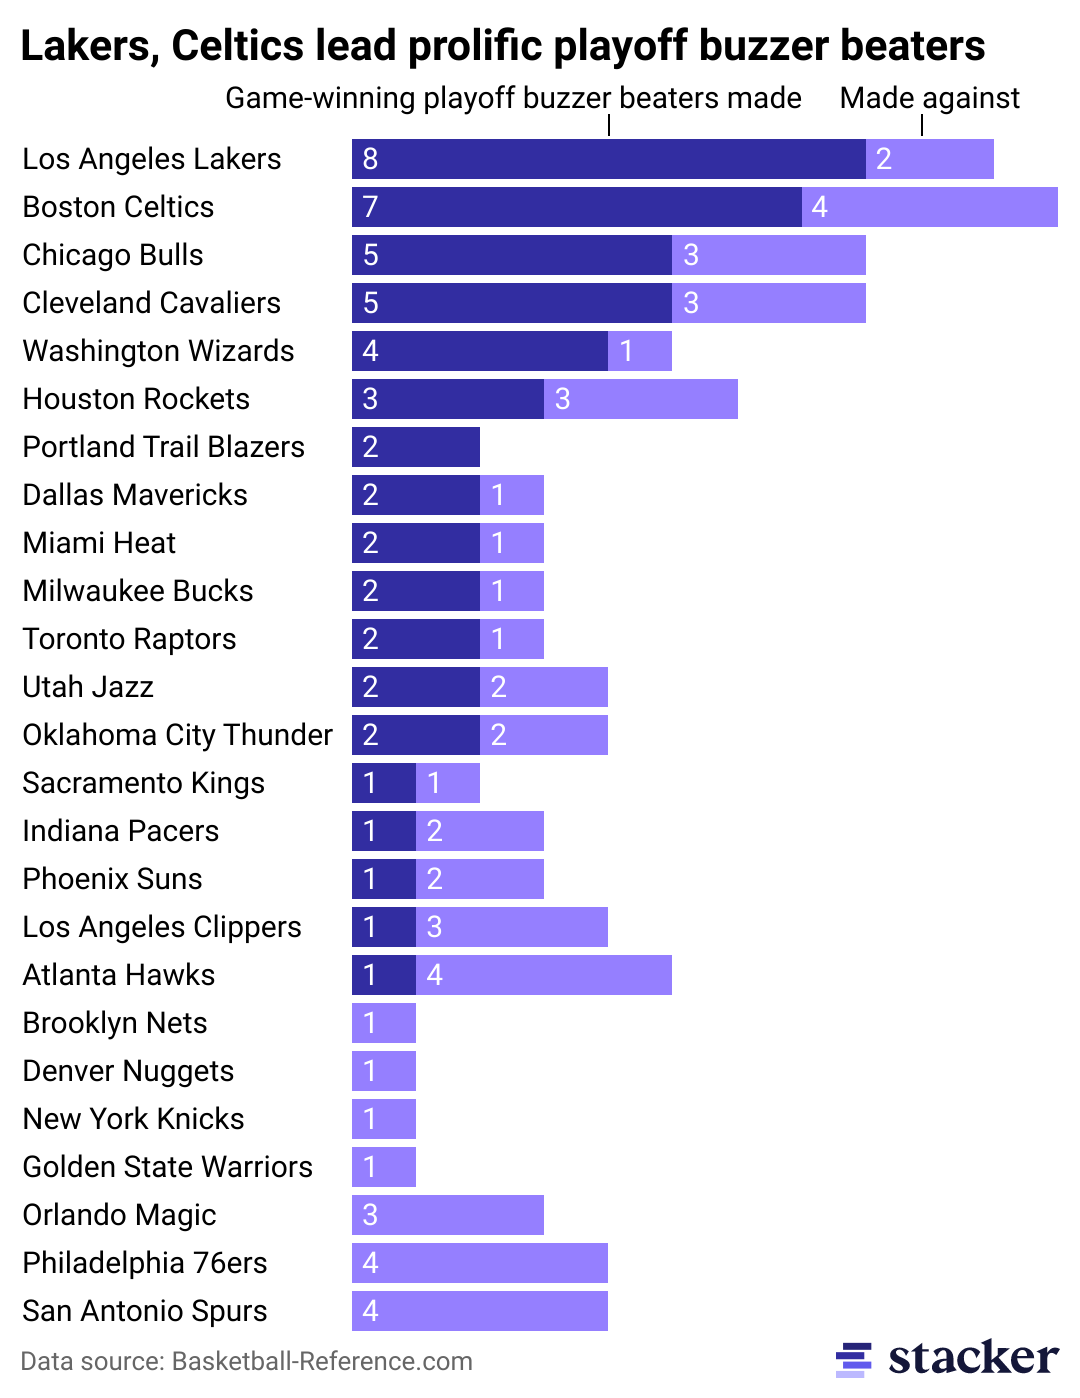 Stacked bar chart of the NBA teams with the most playoff buzzer beaters